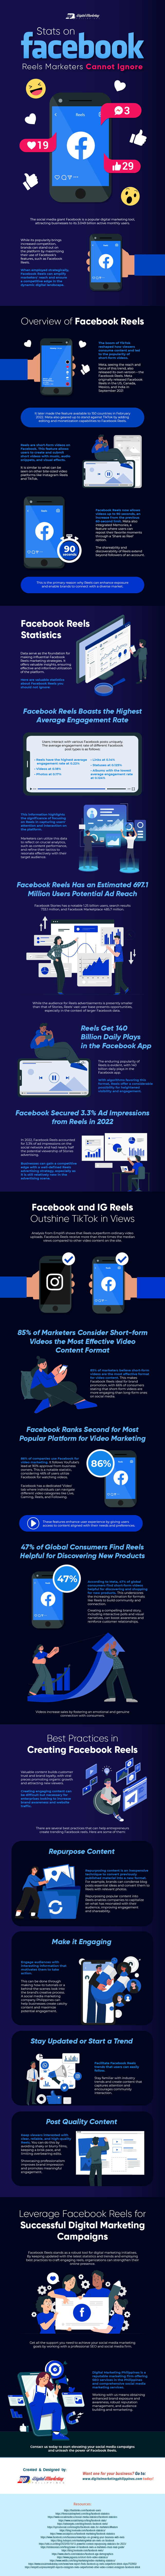 Stats on Facebook Reels Marketers Cannot Ignore Infographic